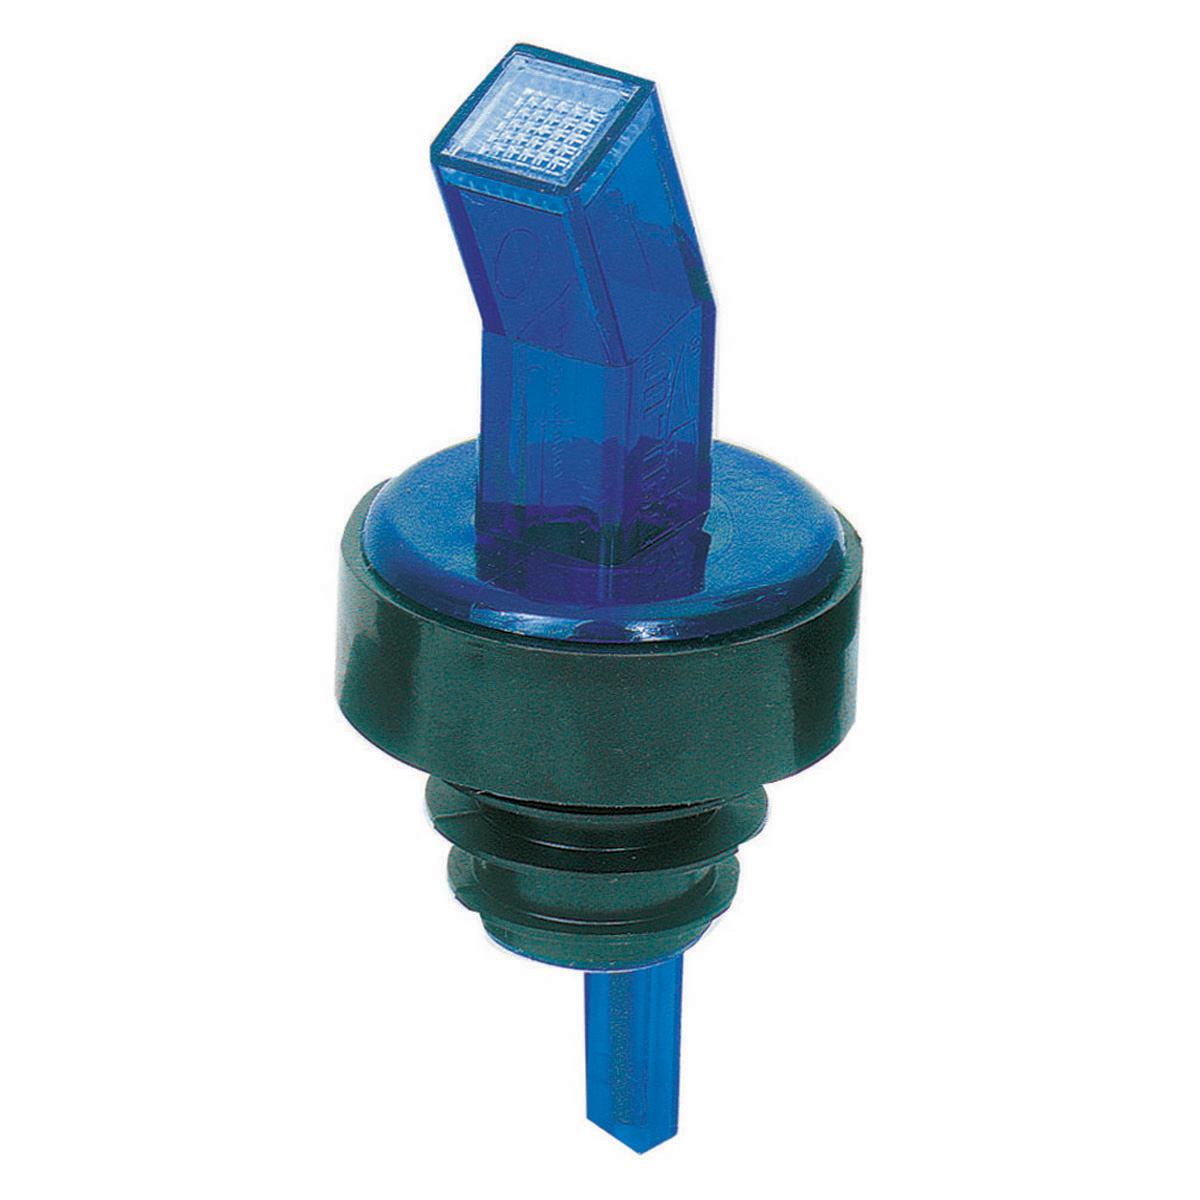 Spill-Stop 313-05 Ban-M Screened Pourer®, blue with black collar, Made in USA